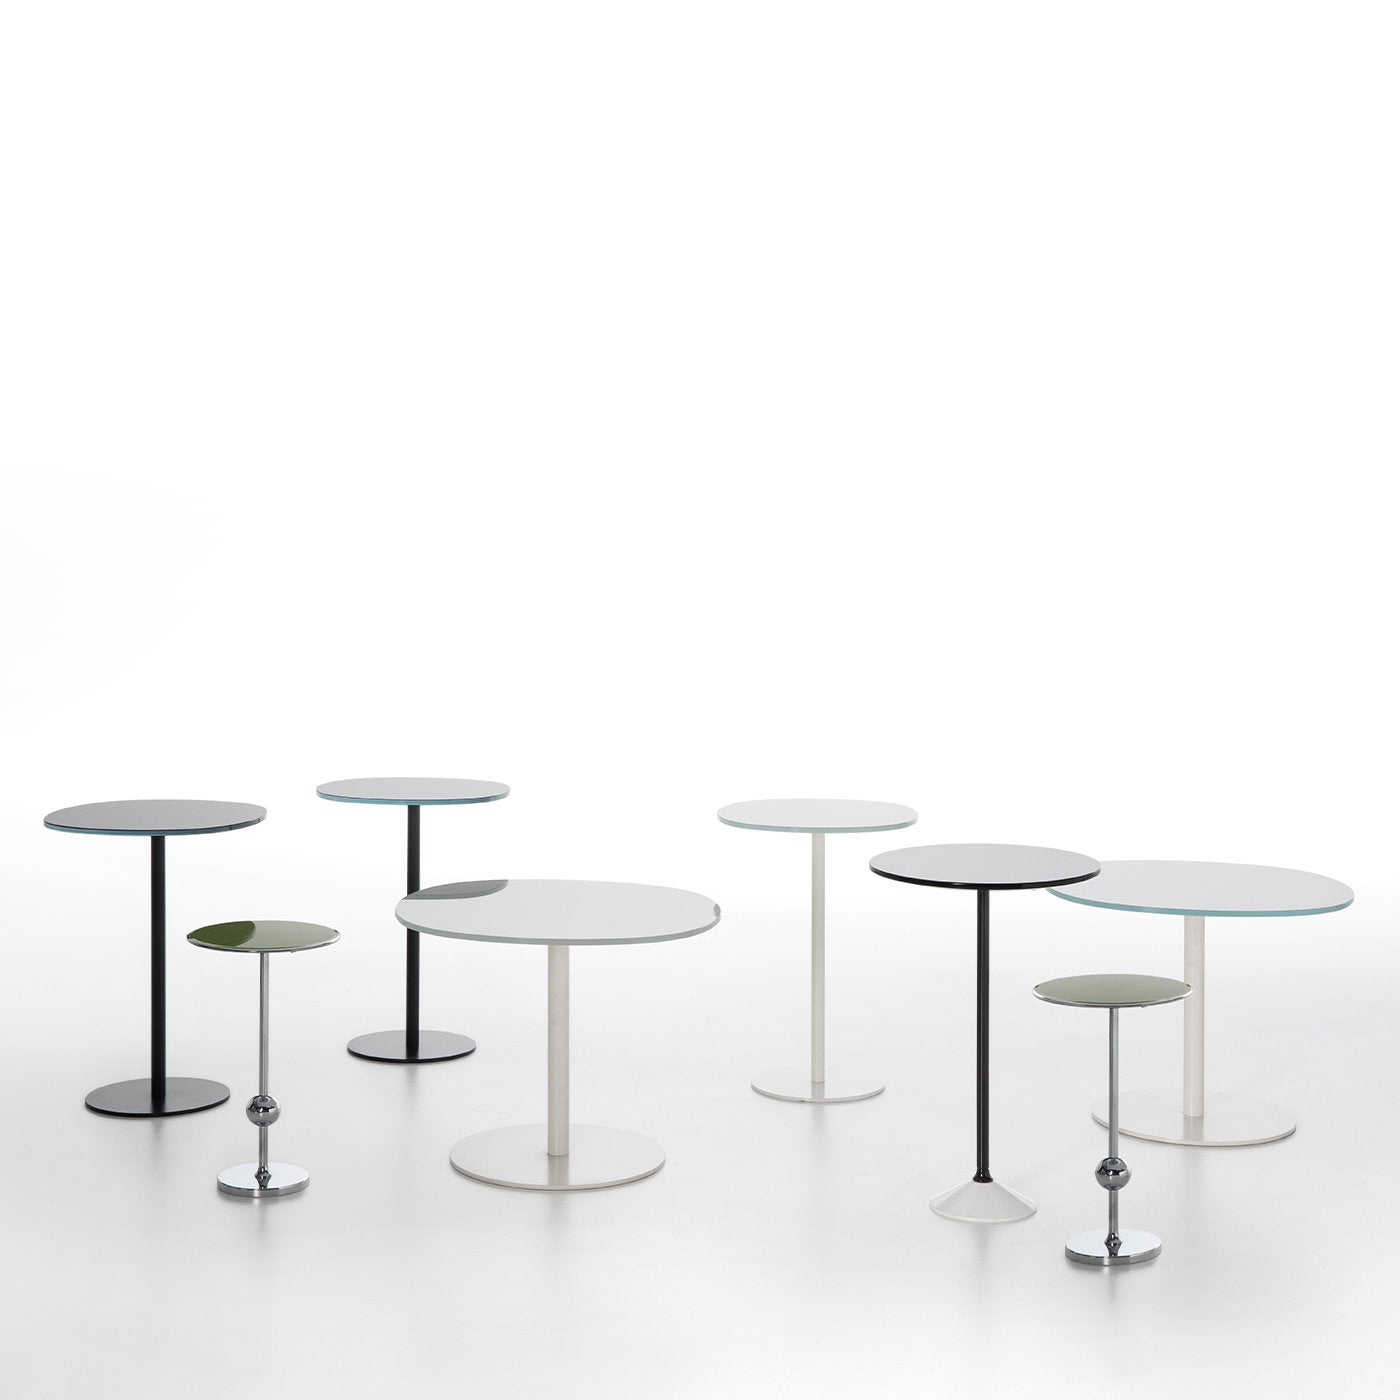 Solenoide Black Tall Side Table by Piero Lissoni - Alternative view 2